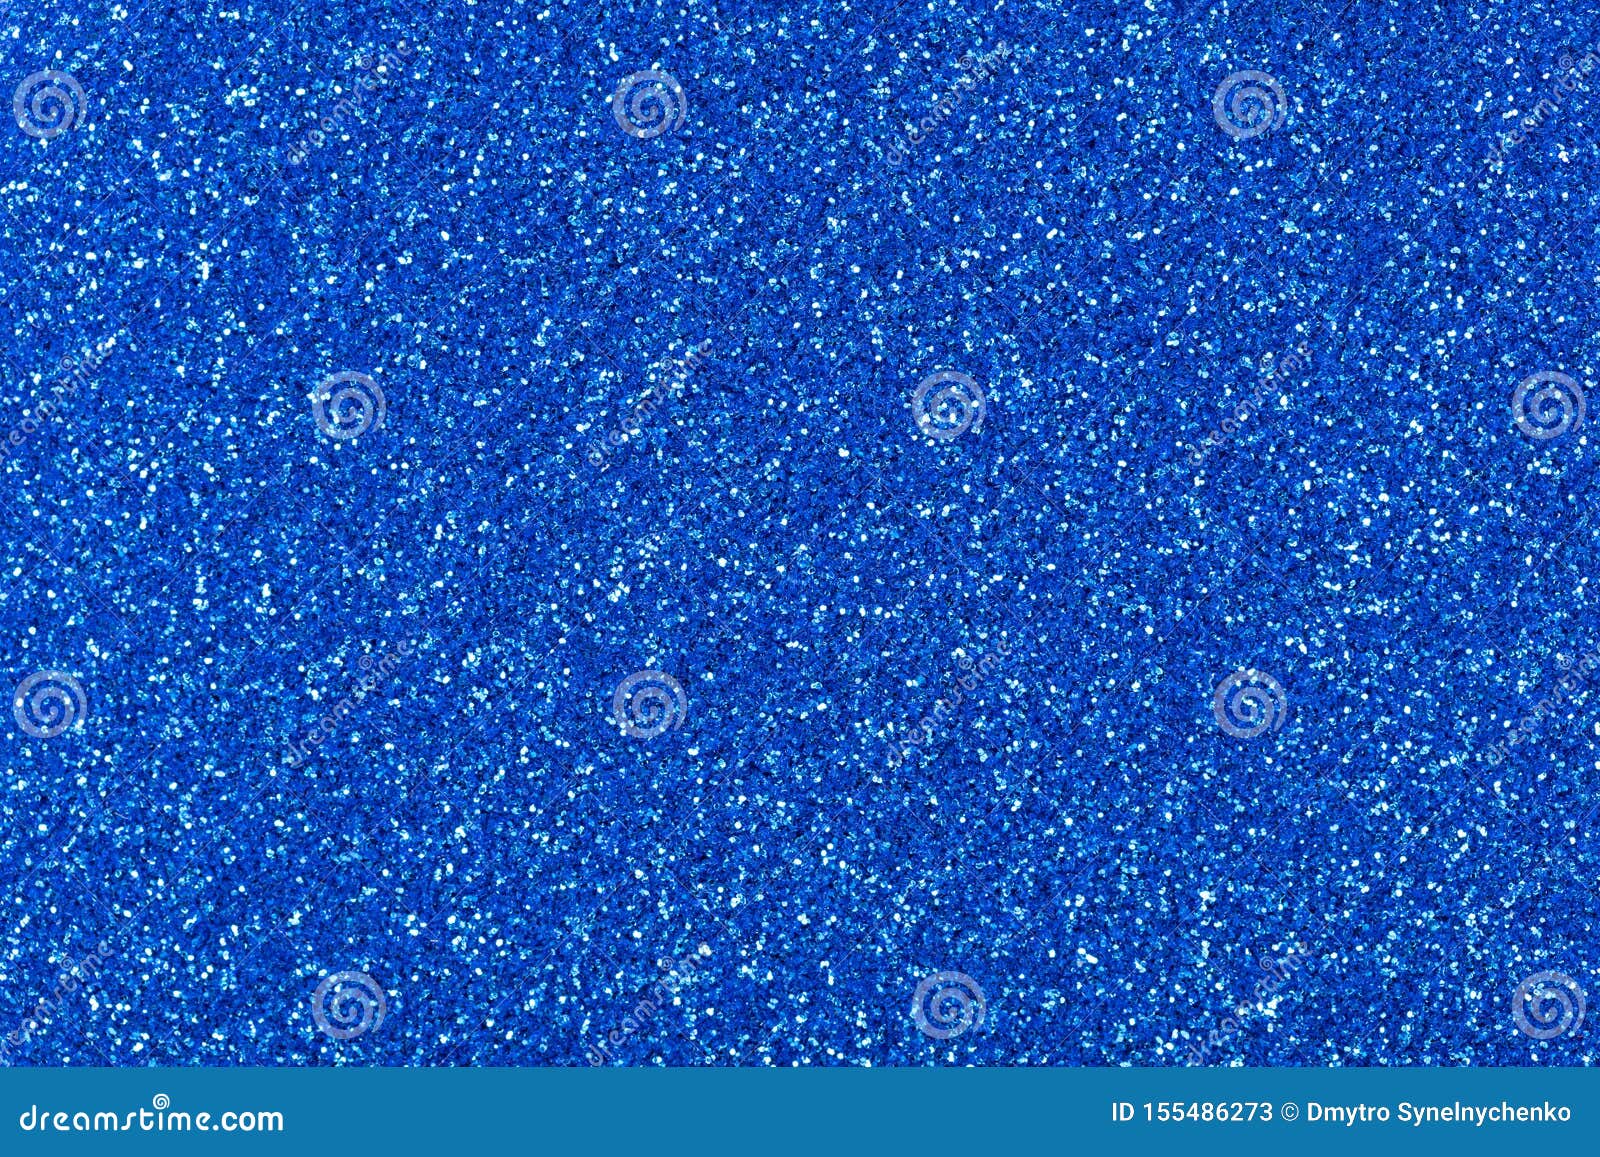 Blue Glisten Glitter Wallpaper Background Texture Illustration Triangle  Holiday Background Image And Wallpaper for Free Download